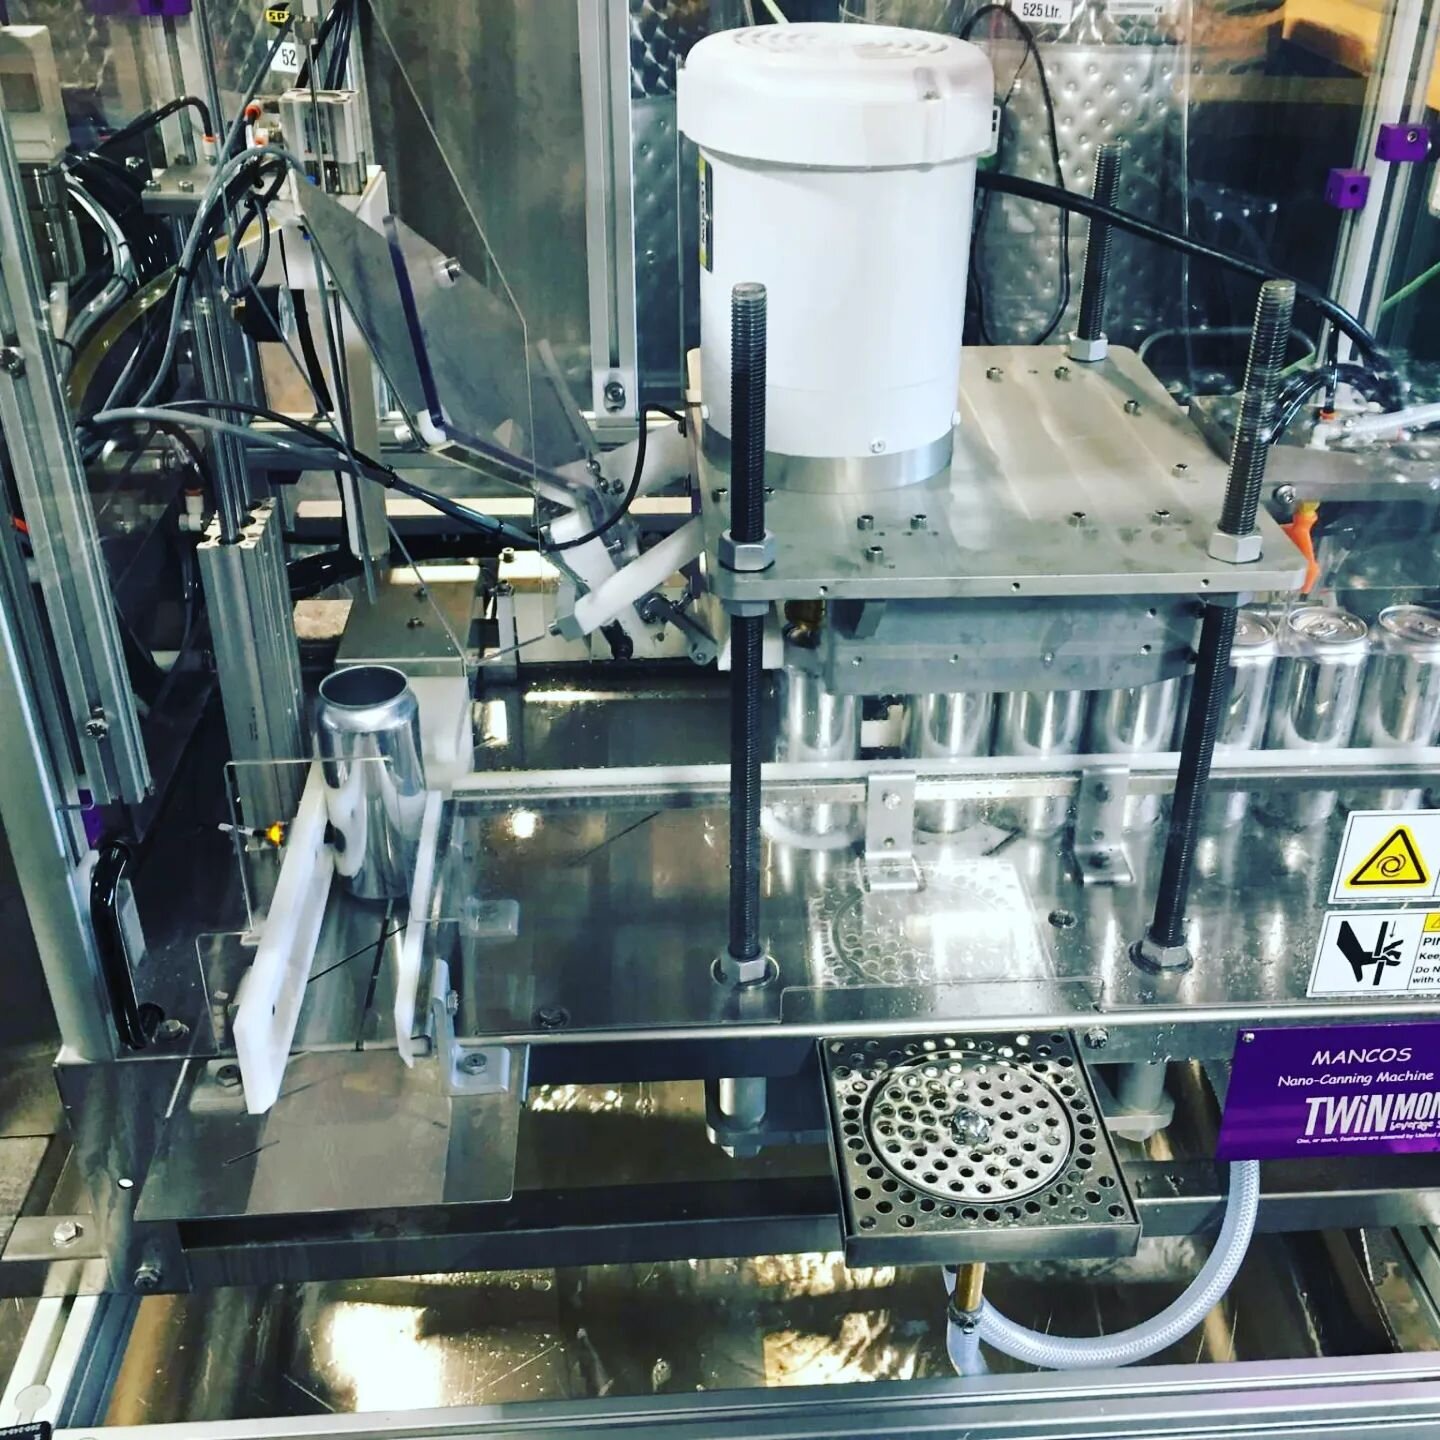 This fancy machine did a thing today  and Lucky Goat IPA is now available in cans to go!

Open until 9pm tonight. See ya soon 🍻